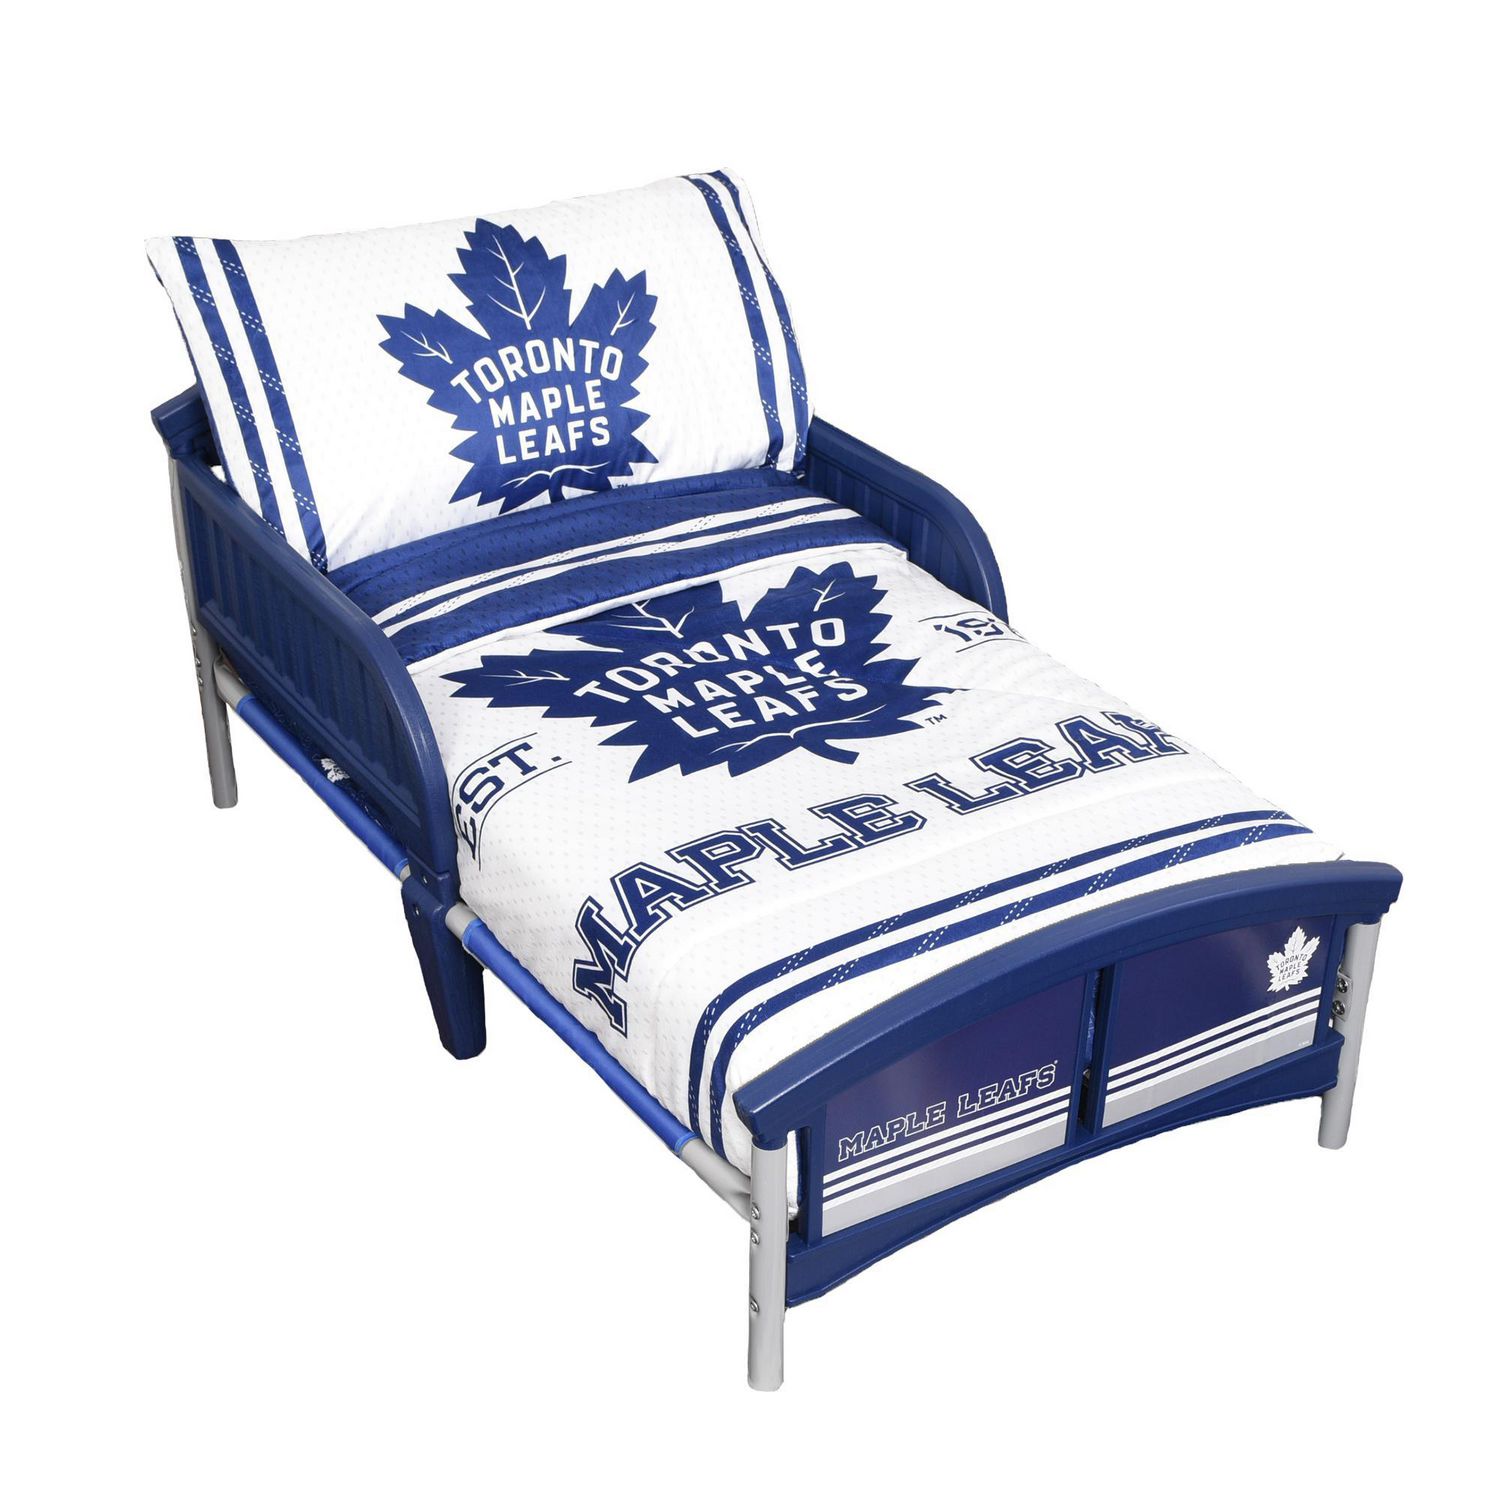 Toronto Maple Leafs Archives - Trends Bedding